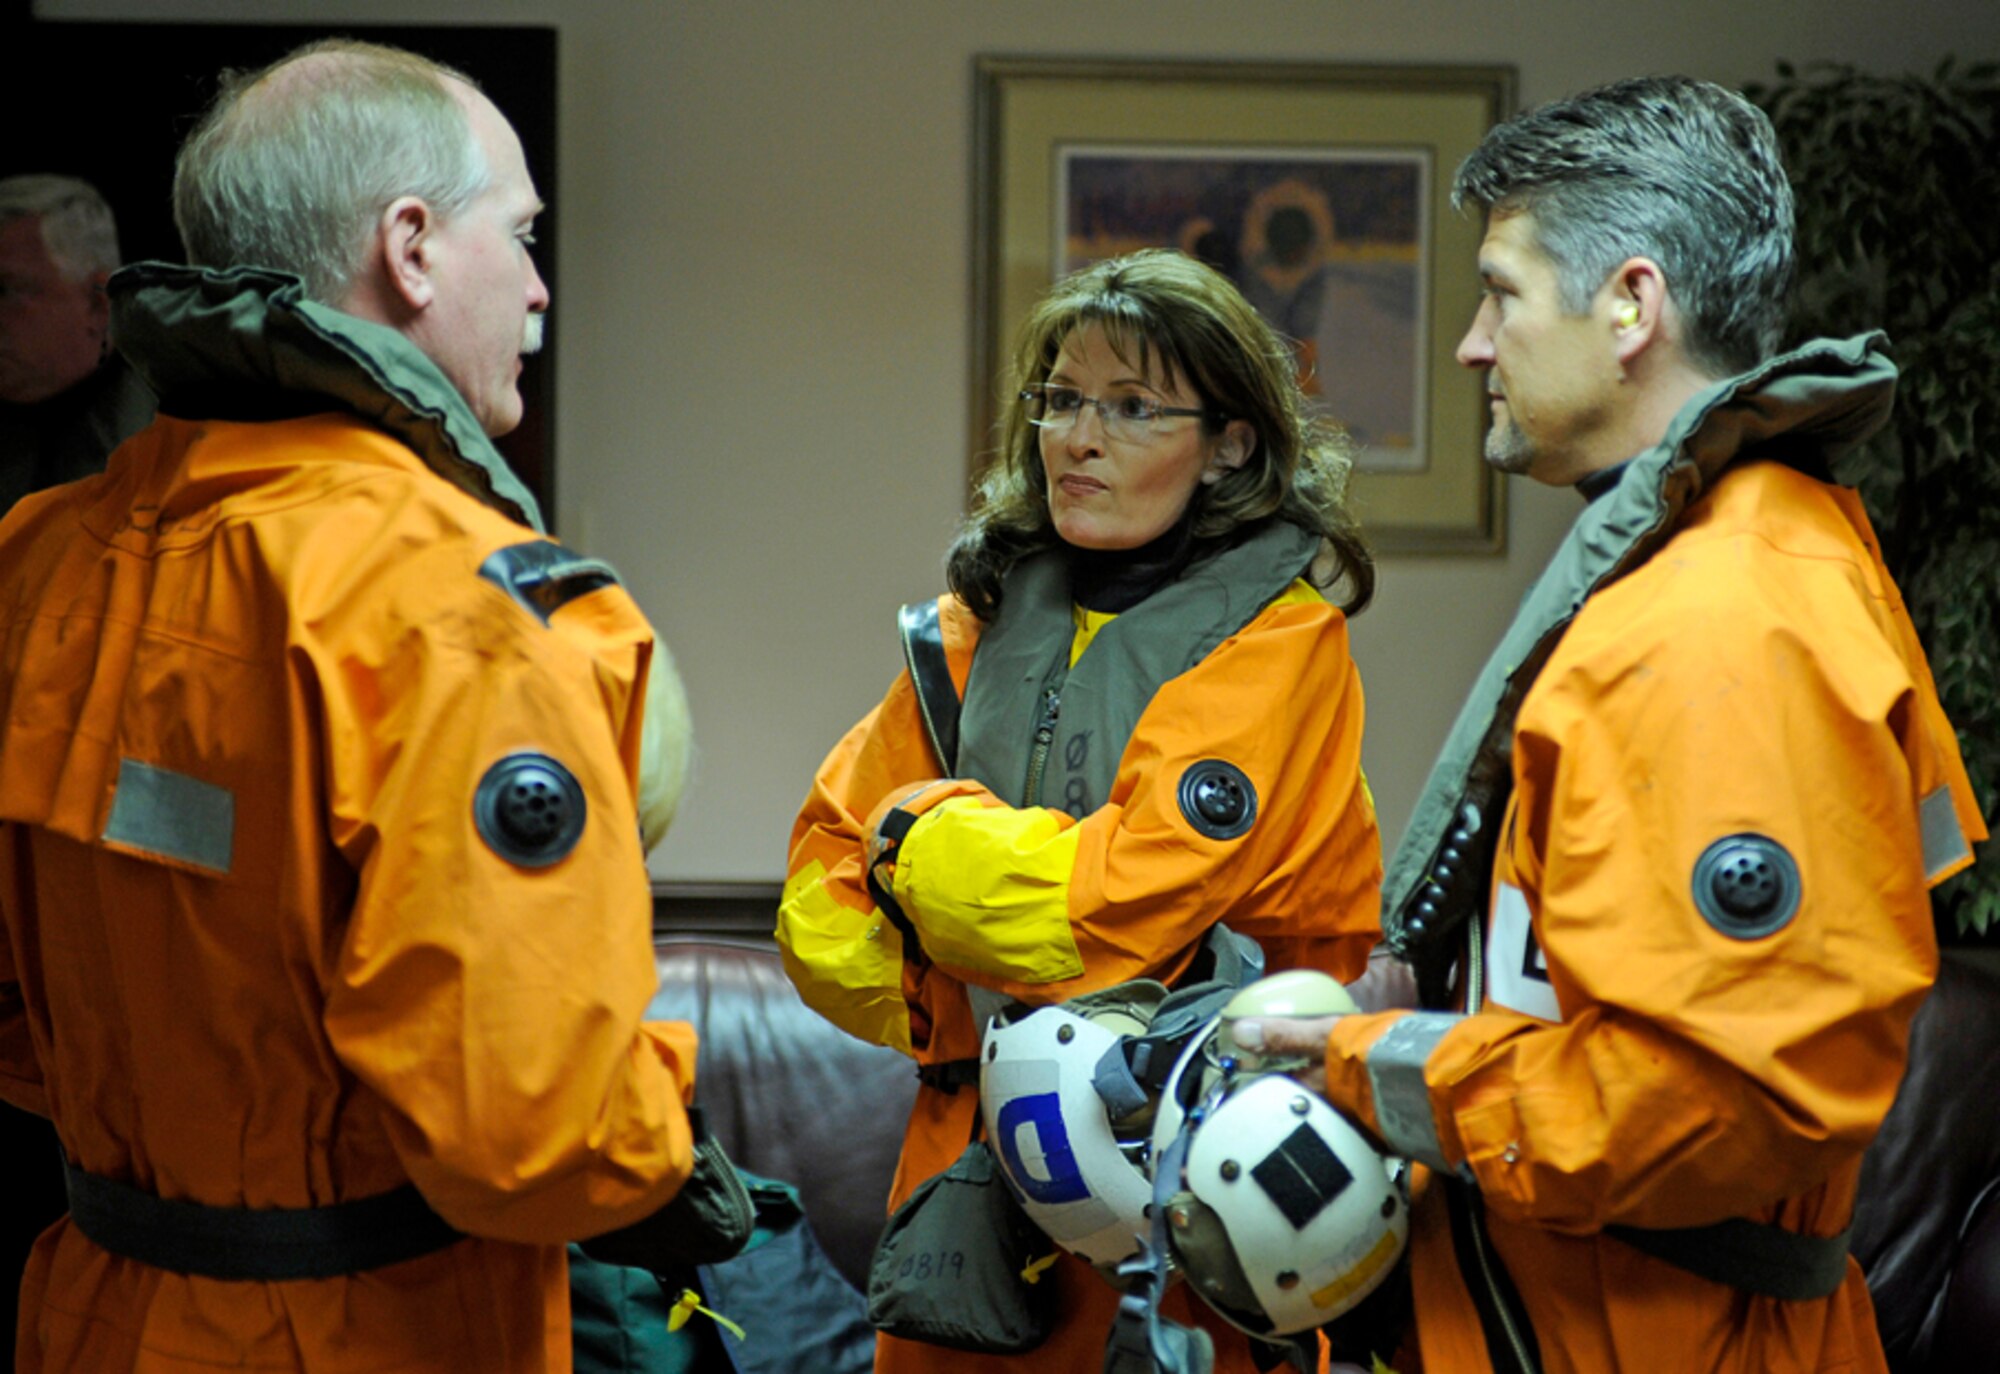 Alaska Governor Sarah Palin and her husband Todd meet with Rear Admiral Mark A. Vance, USS John C. Stennis (CVN 74) Strike Group Commander, before loading onto a C-2A Greyhound logistics aircraft  that will be taking them out to USS John C. Stennis (CVN 74) during exercise Northern Edge 2009, Elmendorf AFB, Alaska, June 18, 2009.  Northern Edge 2009 is Alaska's largest military training exercise.  It prepares joint forces to respond to crises throughout the Asia-Pacific region.  (Released/U.S. Air Force photo by TSgt Dennis J. Henry Jr.)